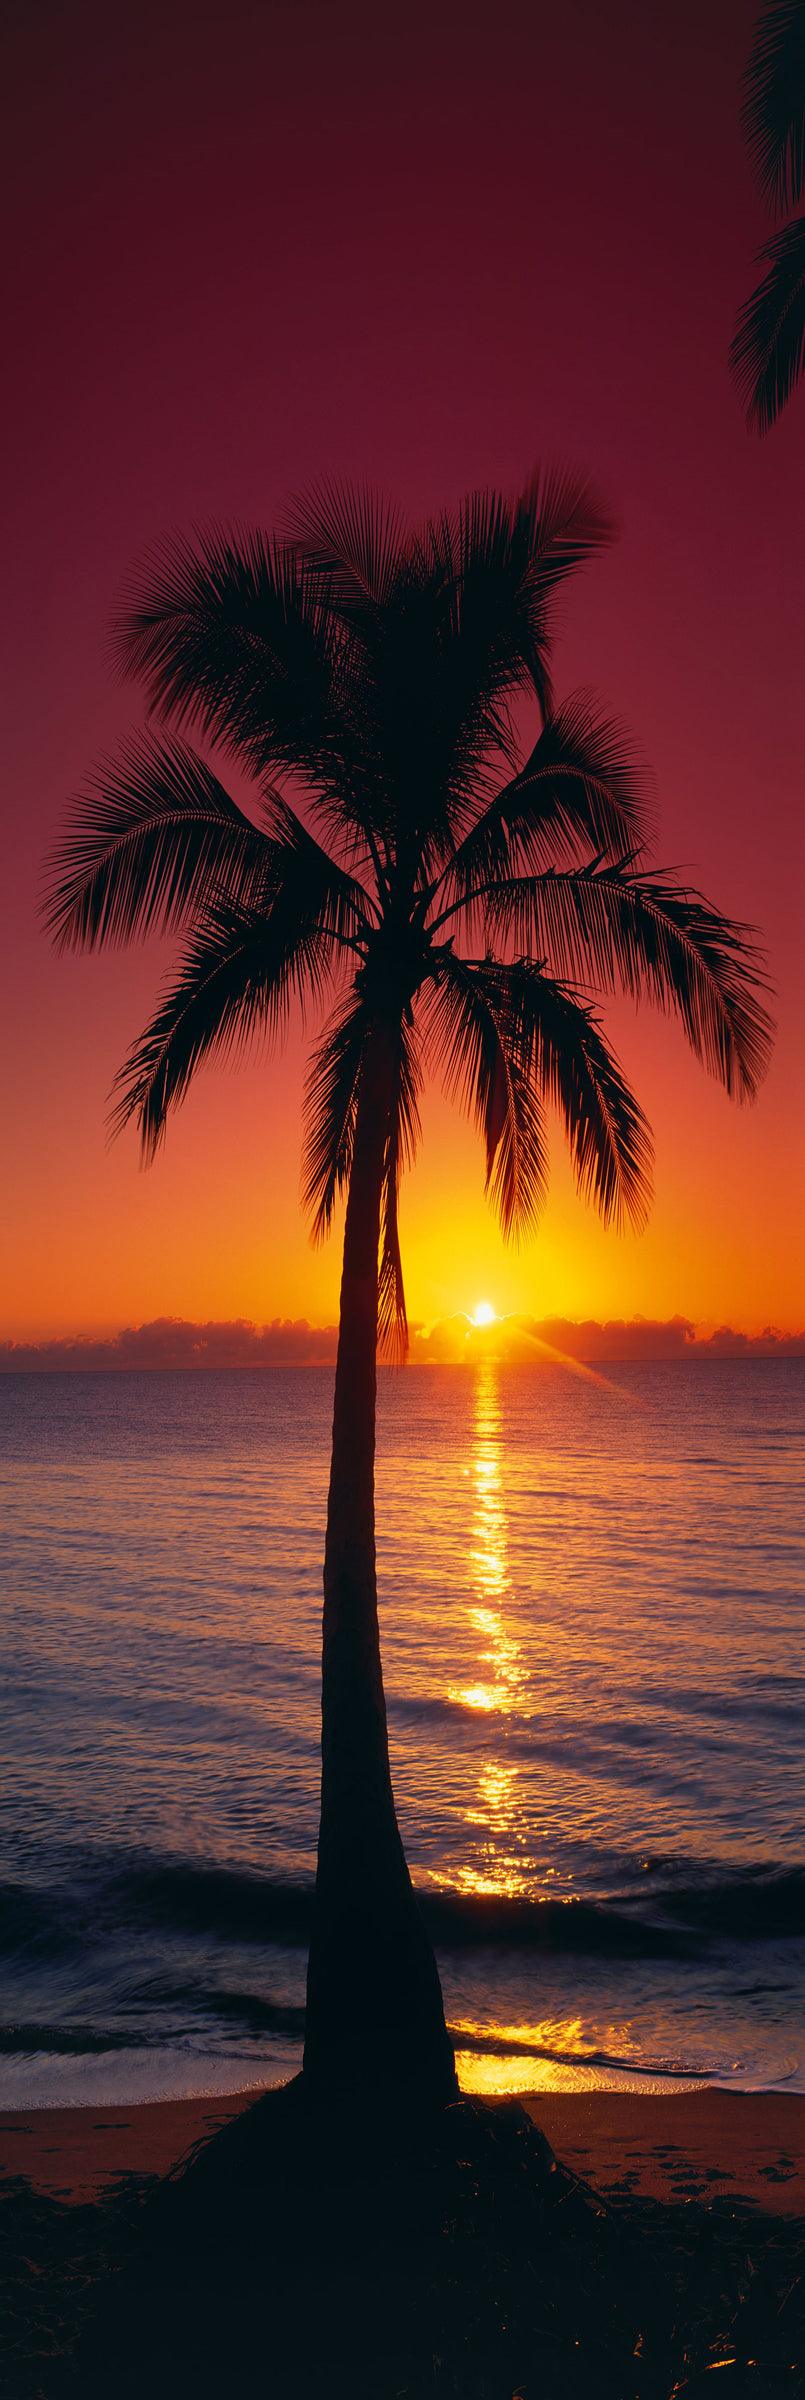 Palm tree on a Cairns beach silhouetted against the sun rising from the low clouds on the ocean horizon